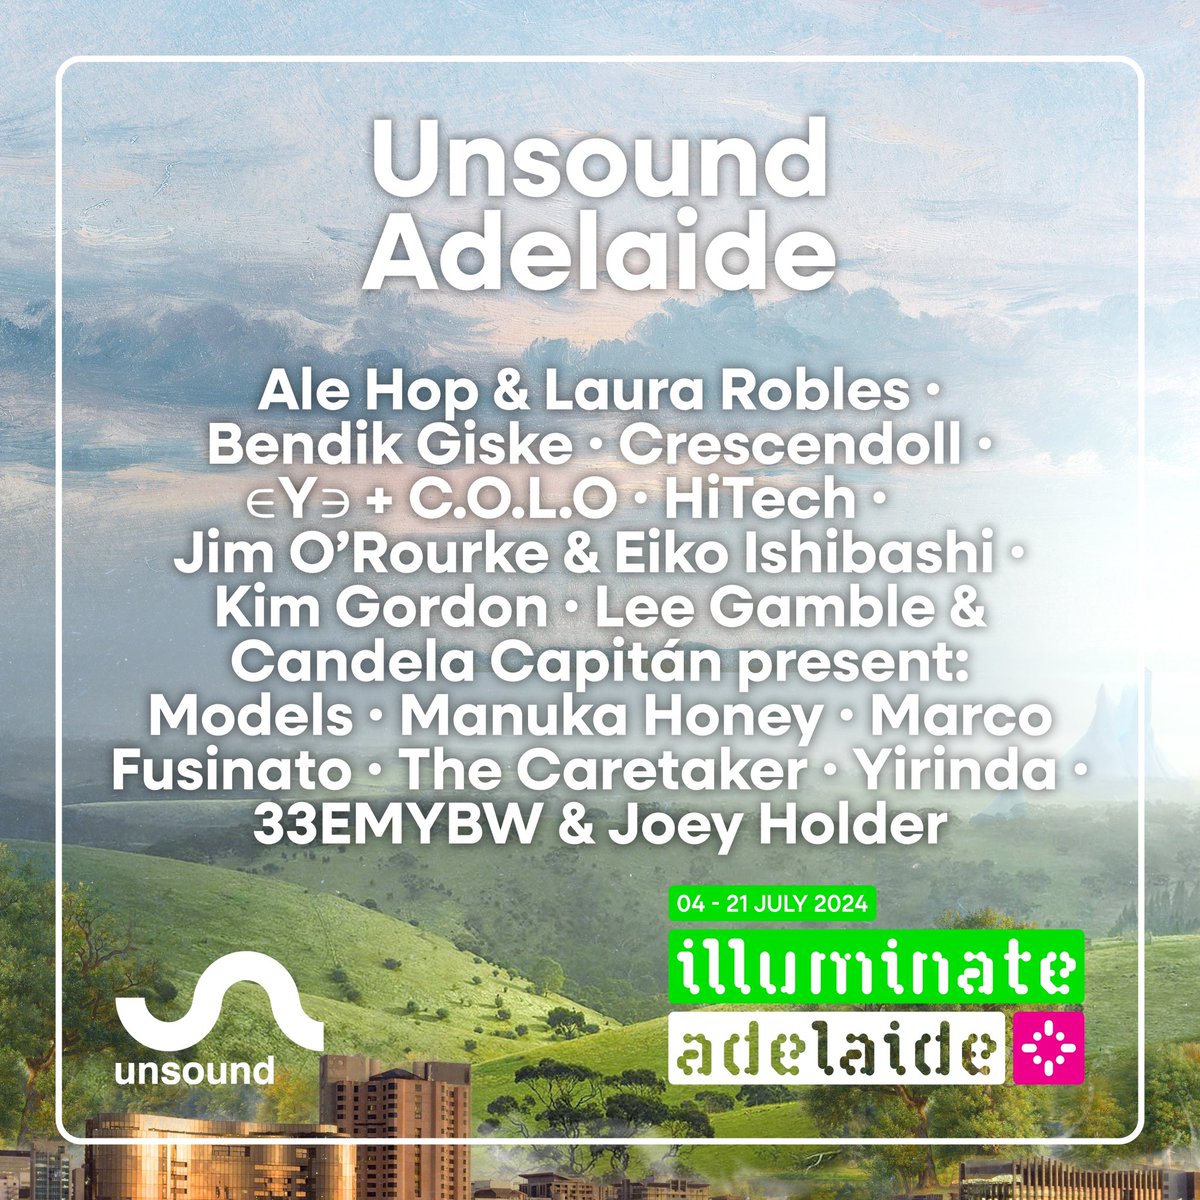 Unsound returns to Adelaide on 19–20 July as part of @IlluminateAdl, with two epic nights at Dom Polski, and the Unsound Club on 20 July. More info and ticket links on the Unsound and Illuminate Adelaide websites: unsound.pl/pl/noise/news/…